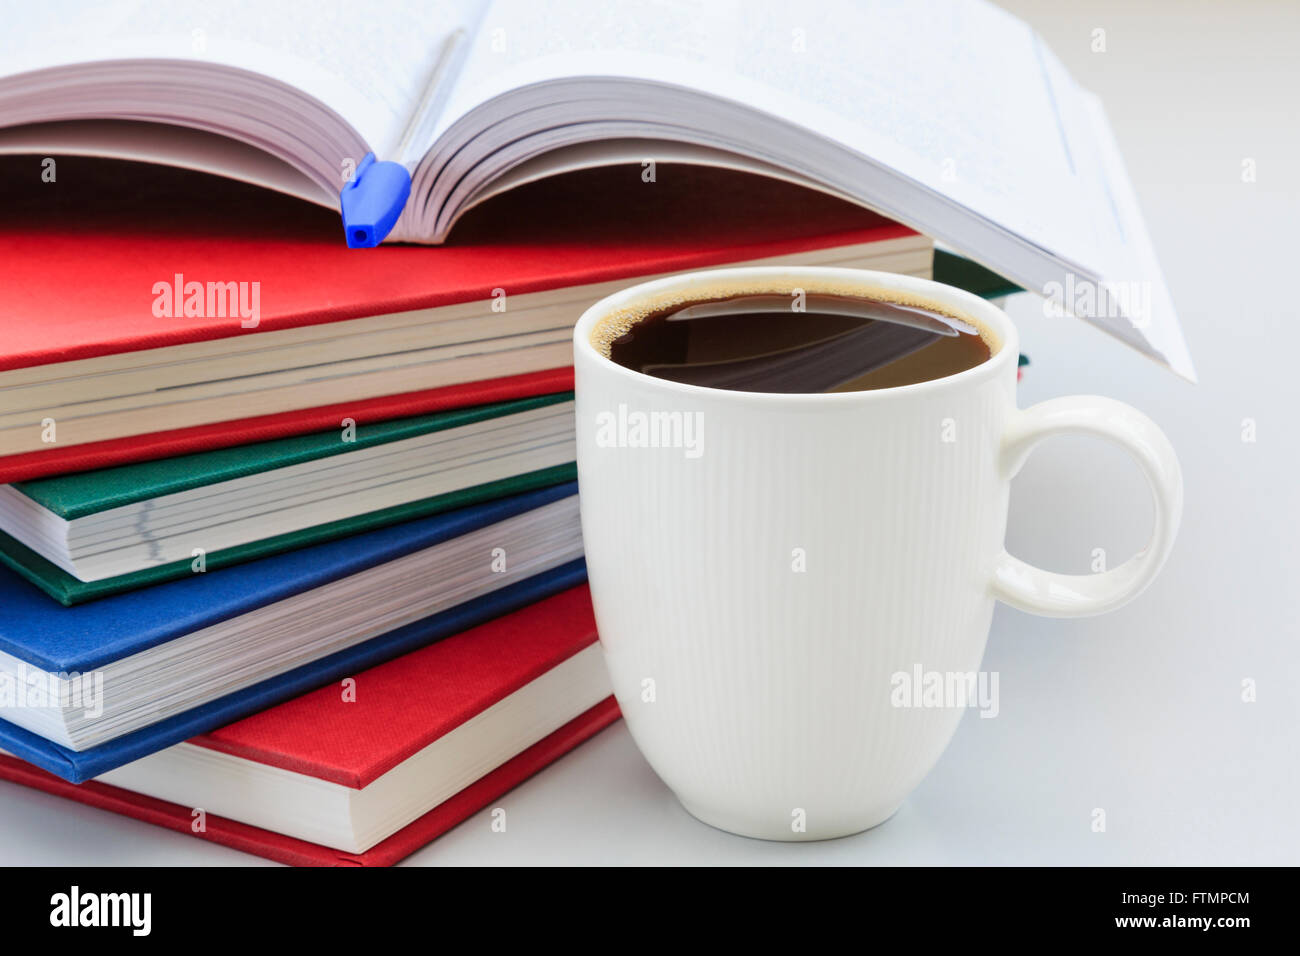 Student's study scene with pile of books on a desk with a mug of strong black coffee to help stay awake for revising studying. England UK Britain Stock Photo